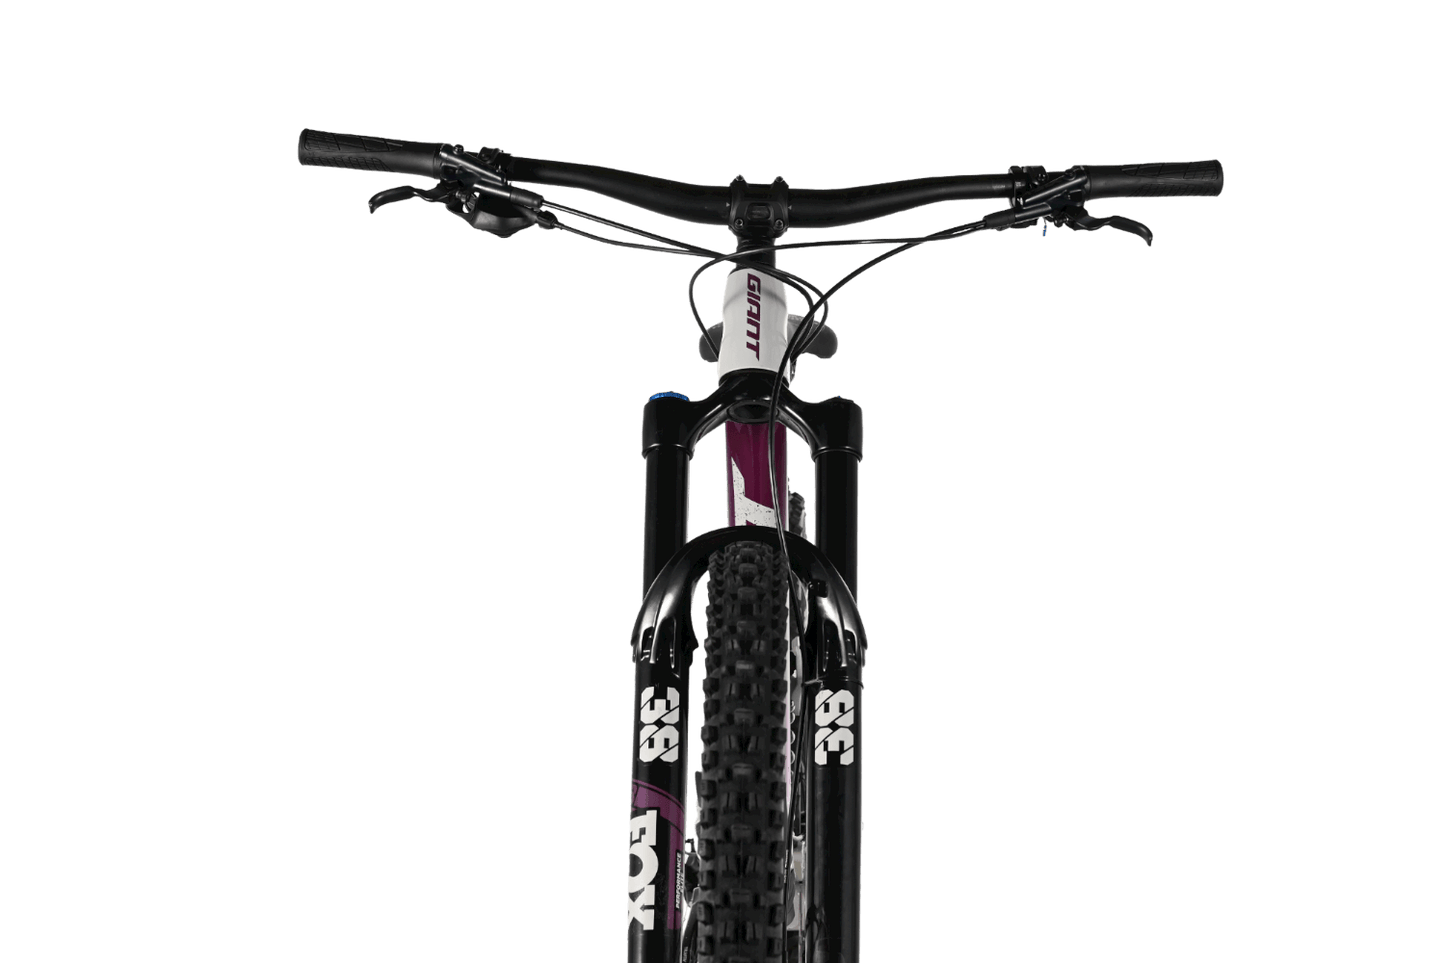 Giant Reign 29 SX | 2021 - S - Loop Sports